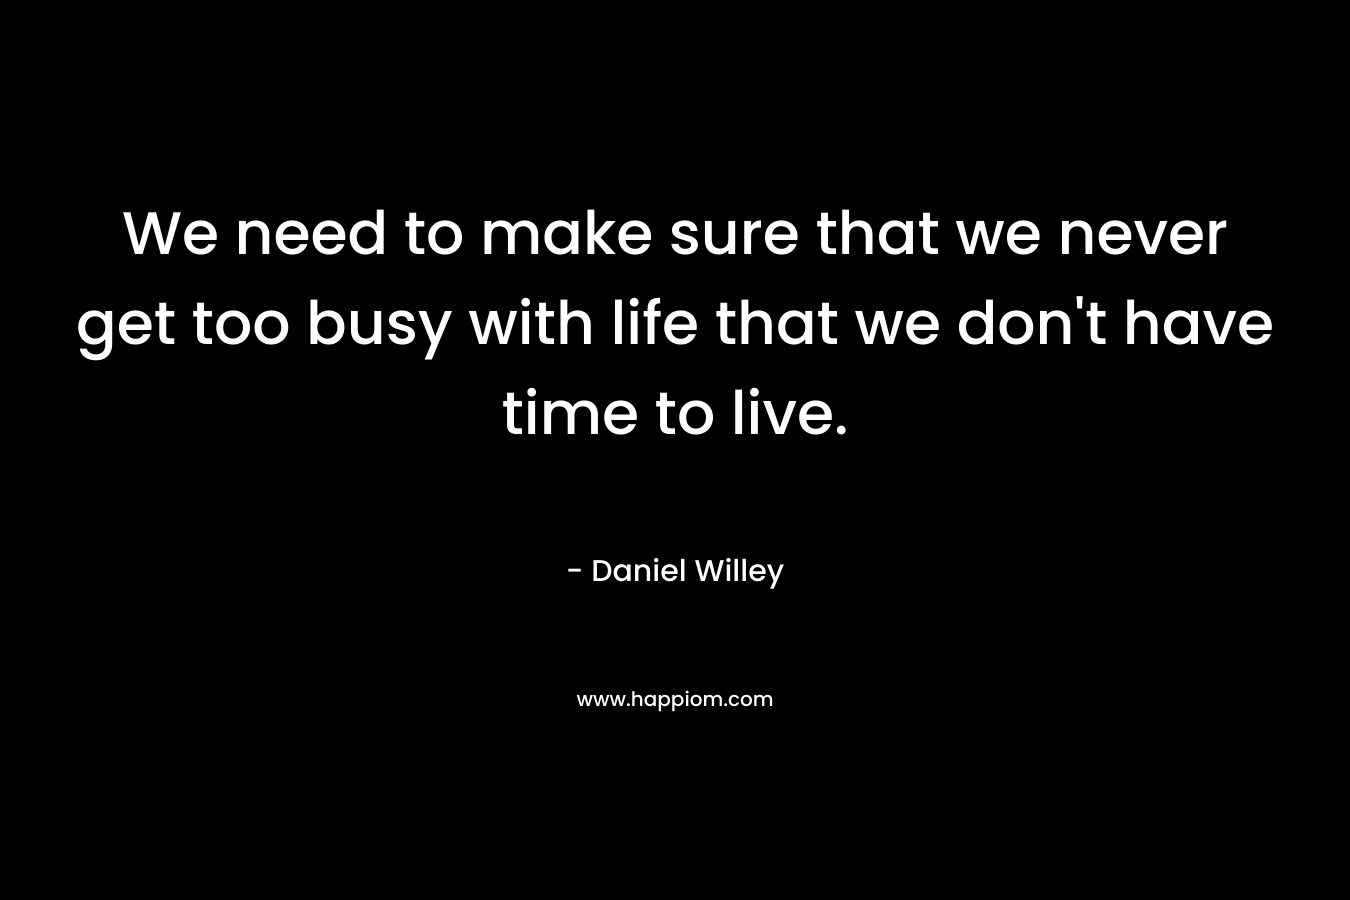 We need to make sure that we never get too busy with life that we don’t have time to live. – Daniel Willey